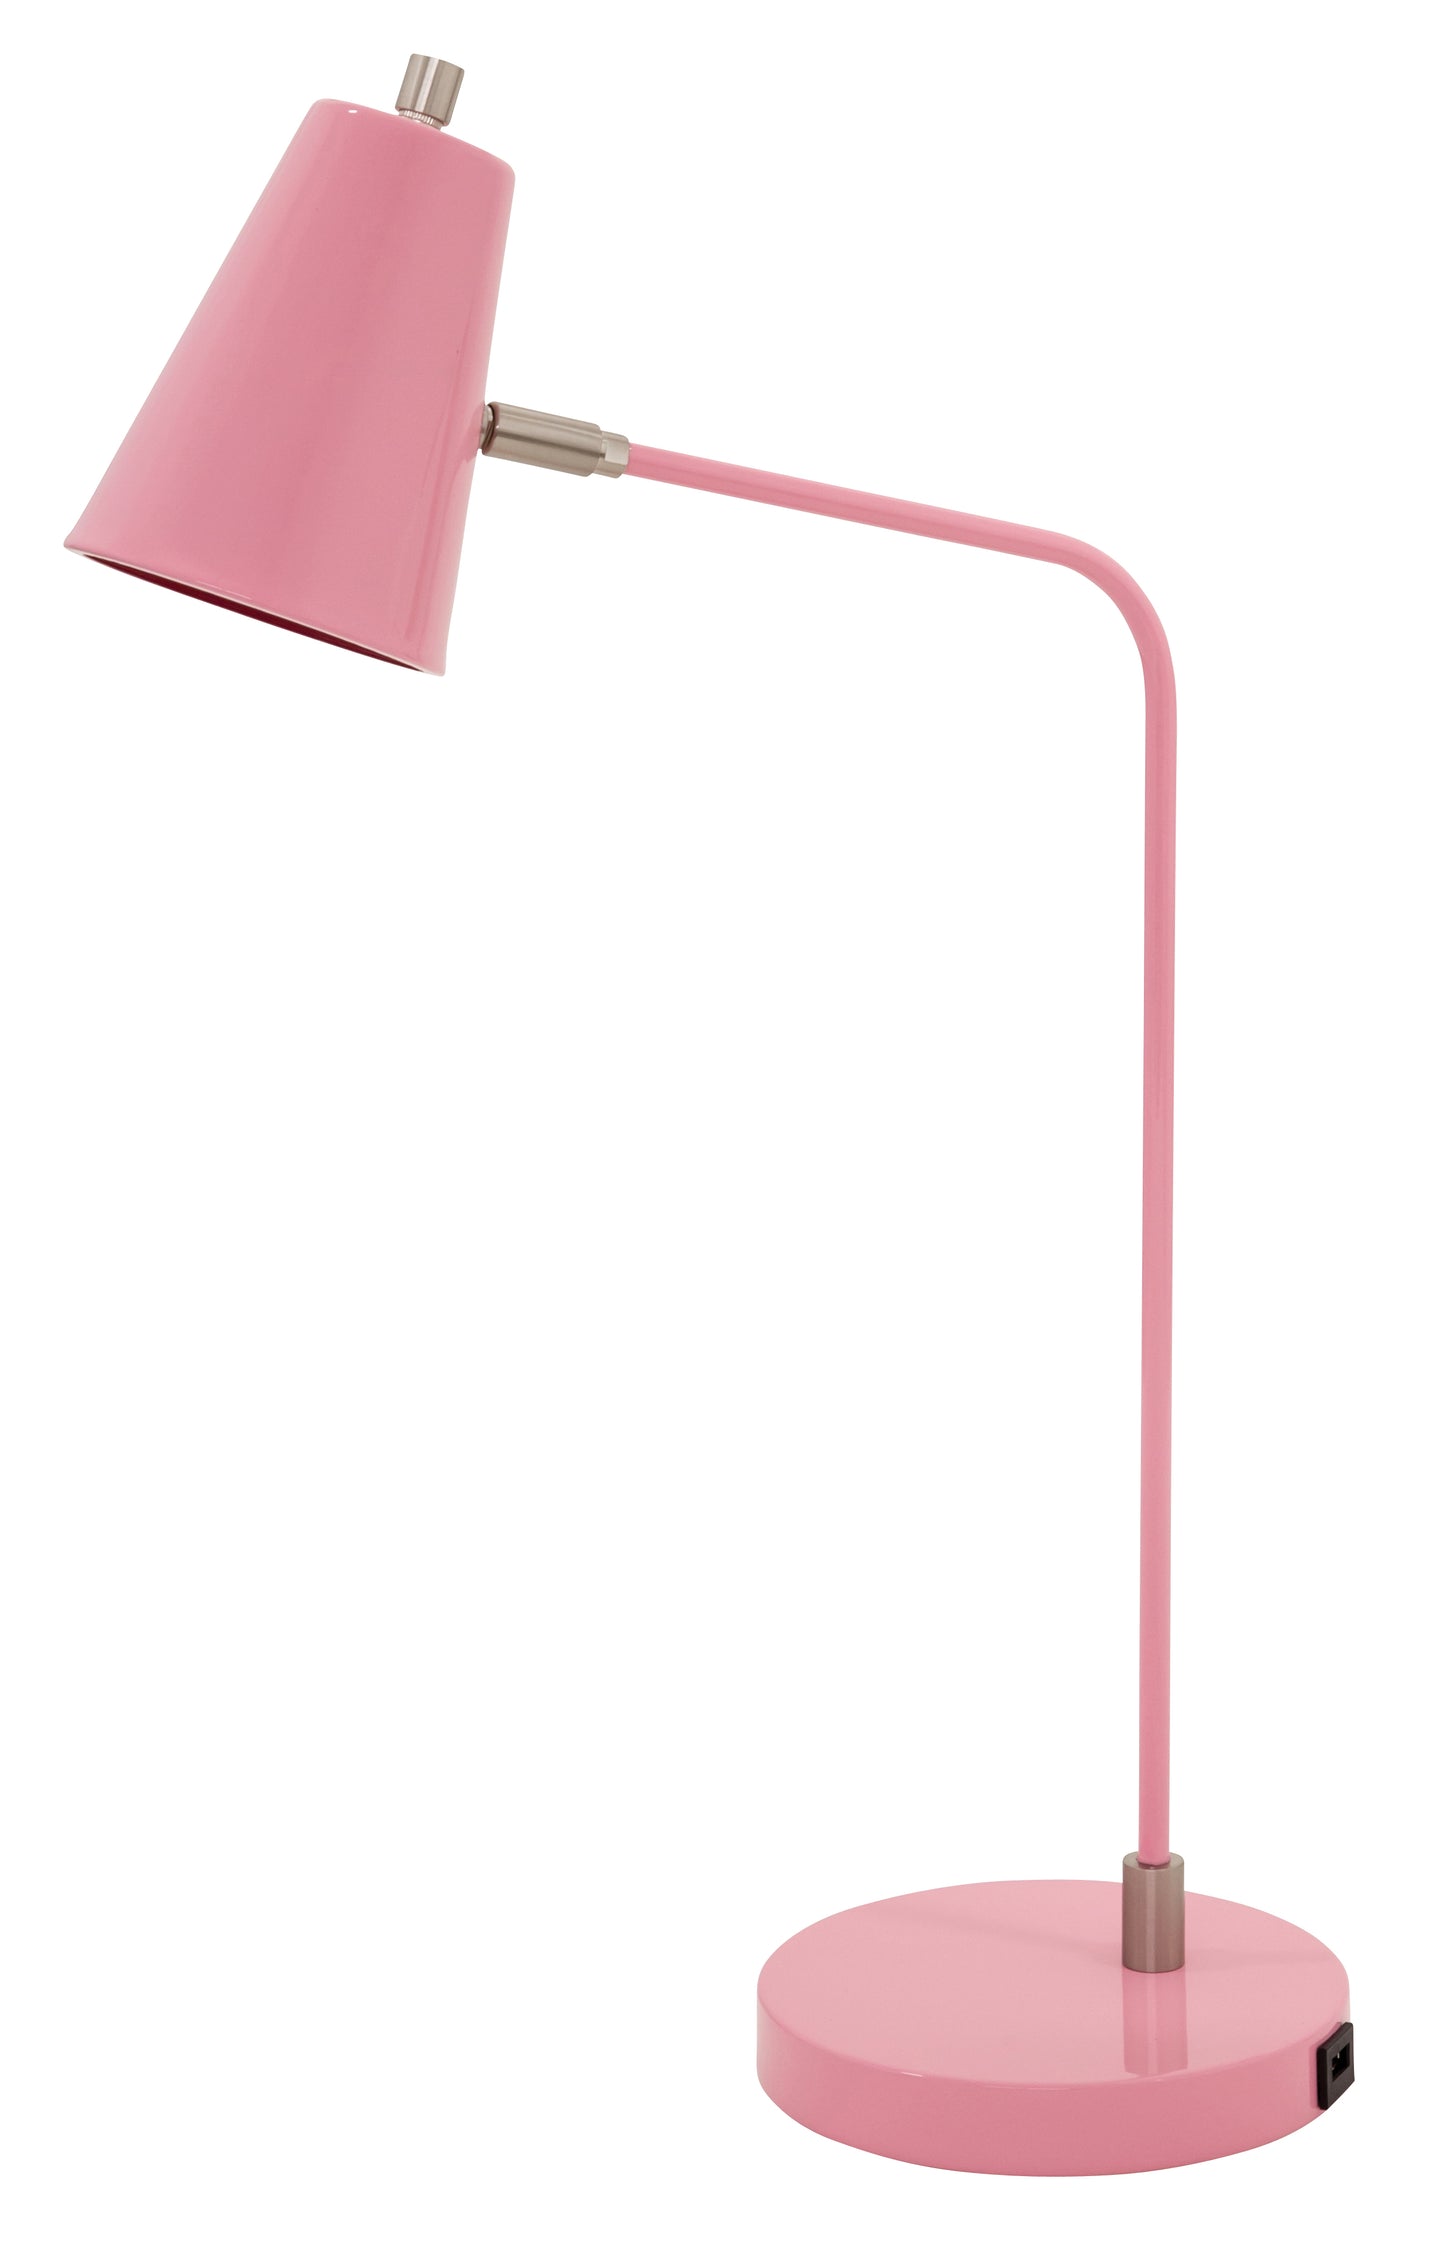 House of Troy Kirby LED task lamp in pink with satin nickel accents and USB port K150-PK